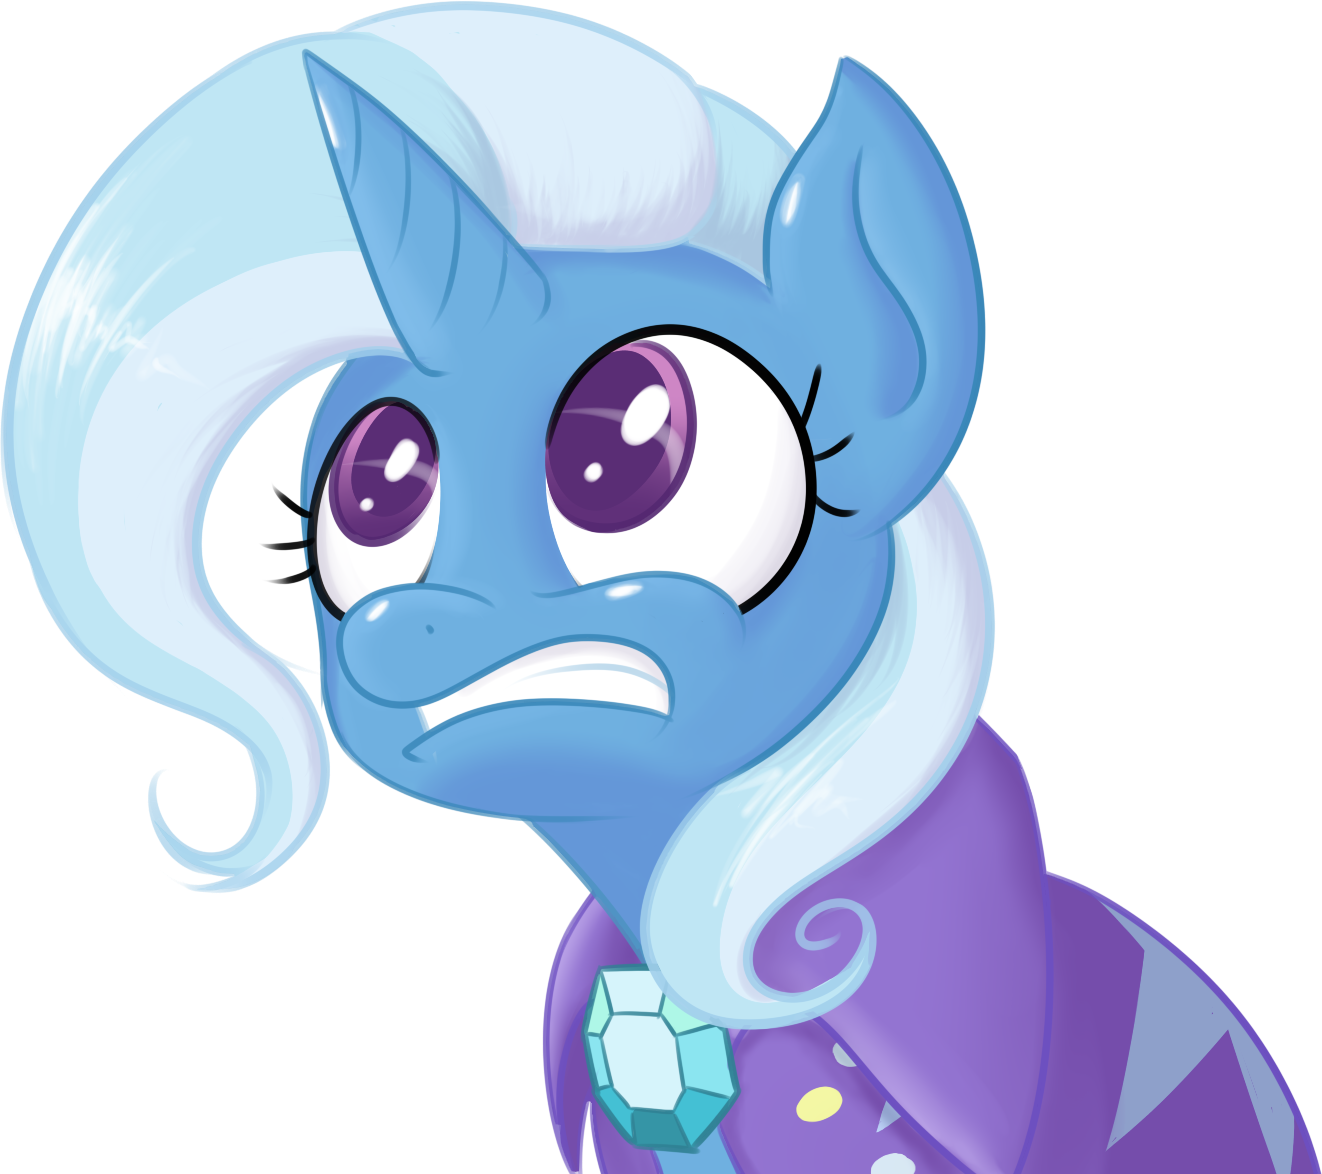 sig-4790734.trixie_face_by_miketheuser-d5fiqh5.png